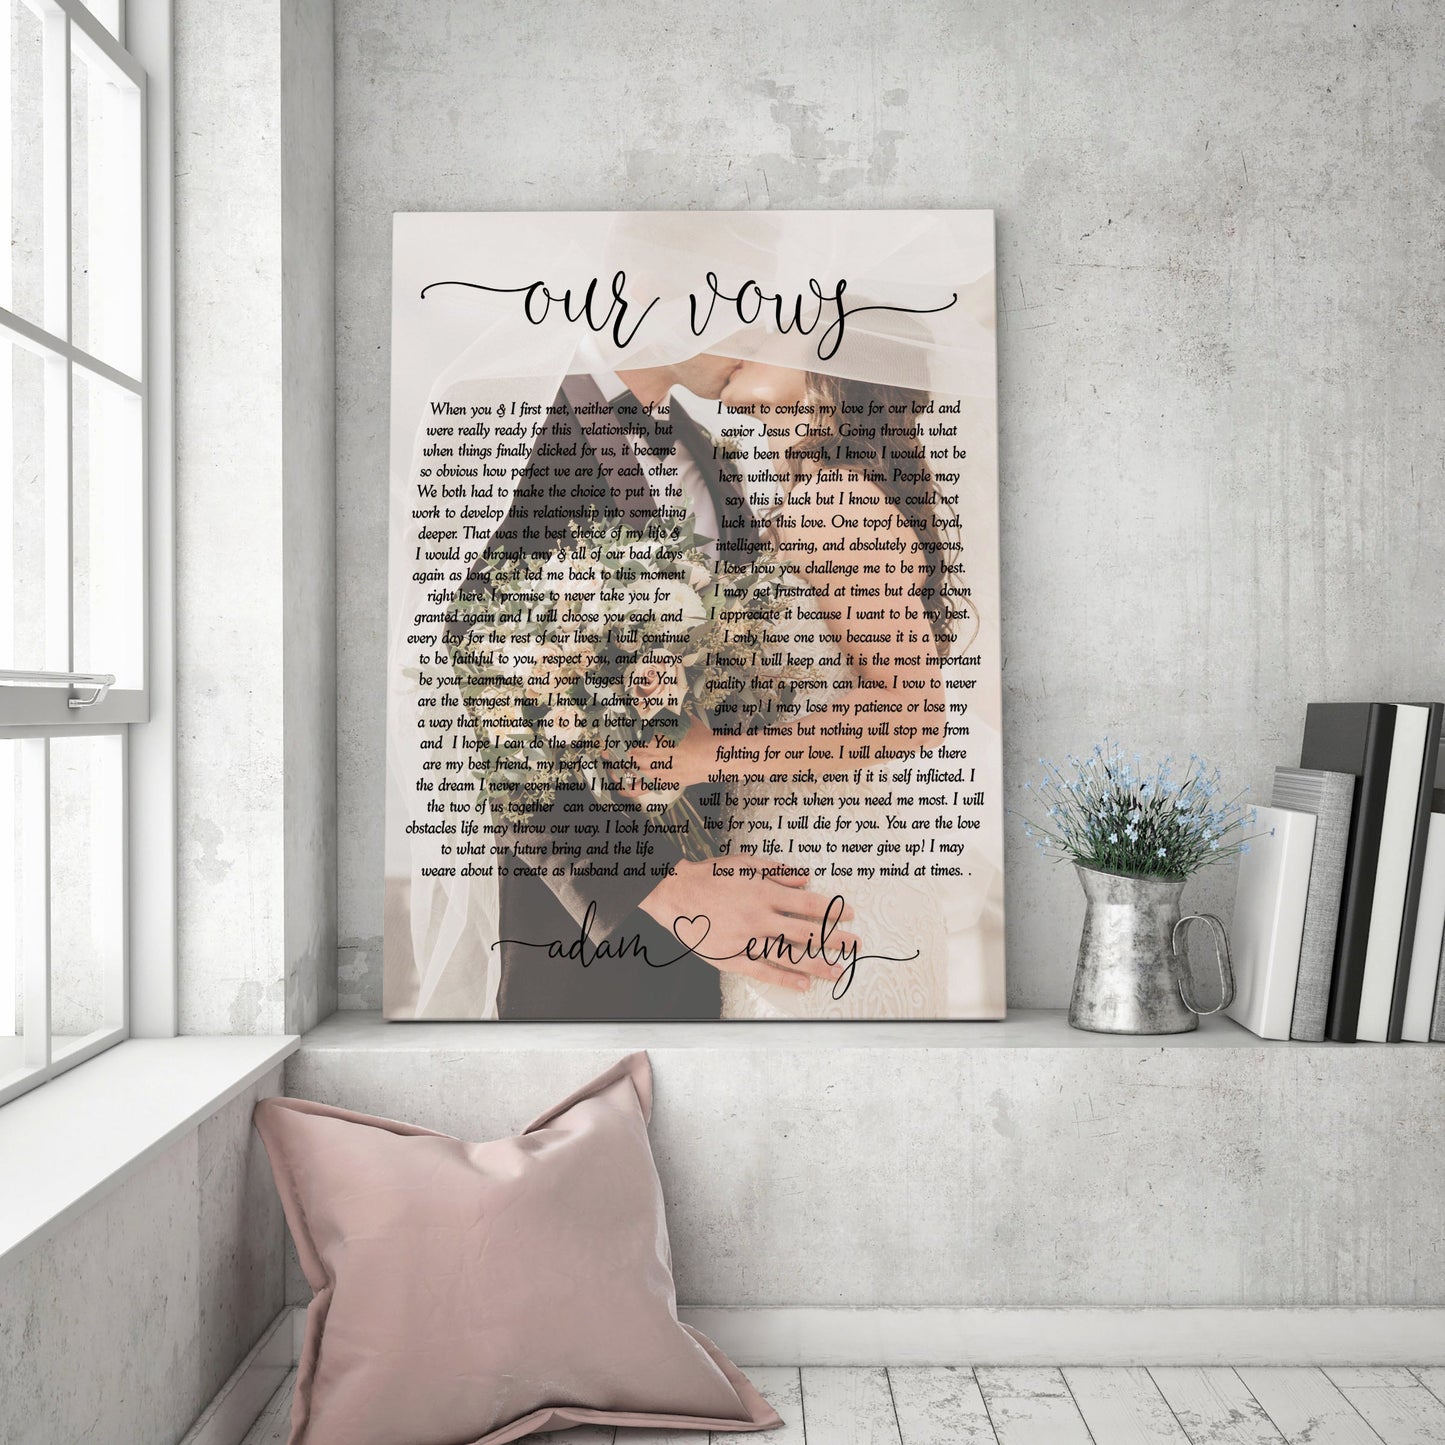 His and Hers Vows framed canvas